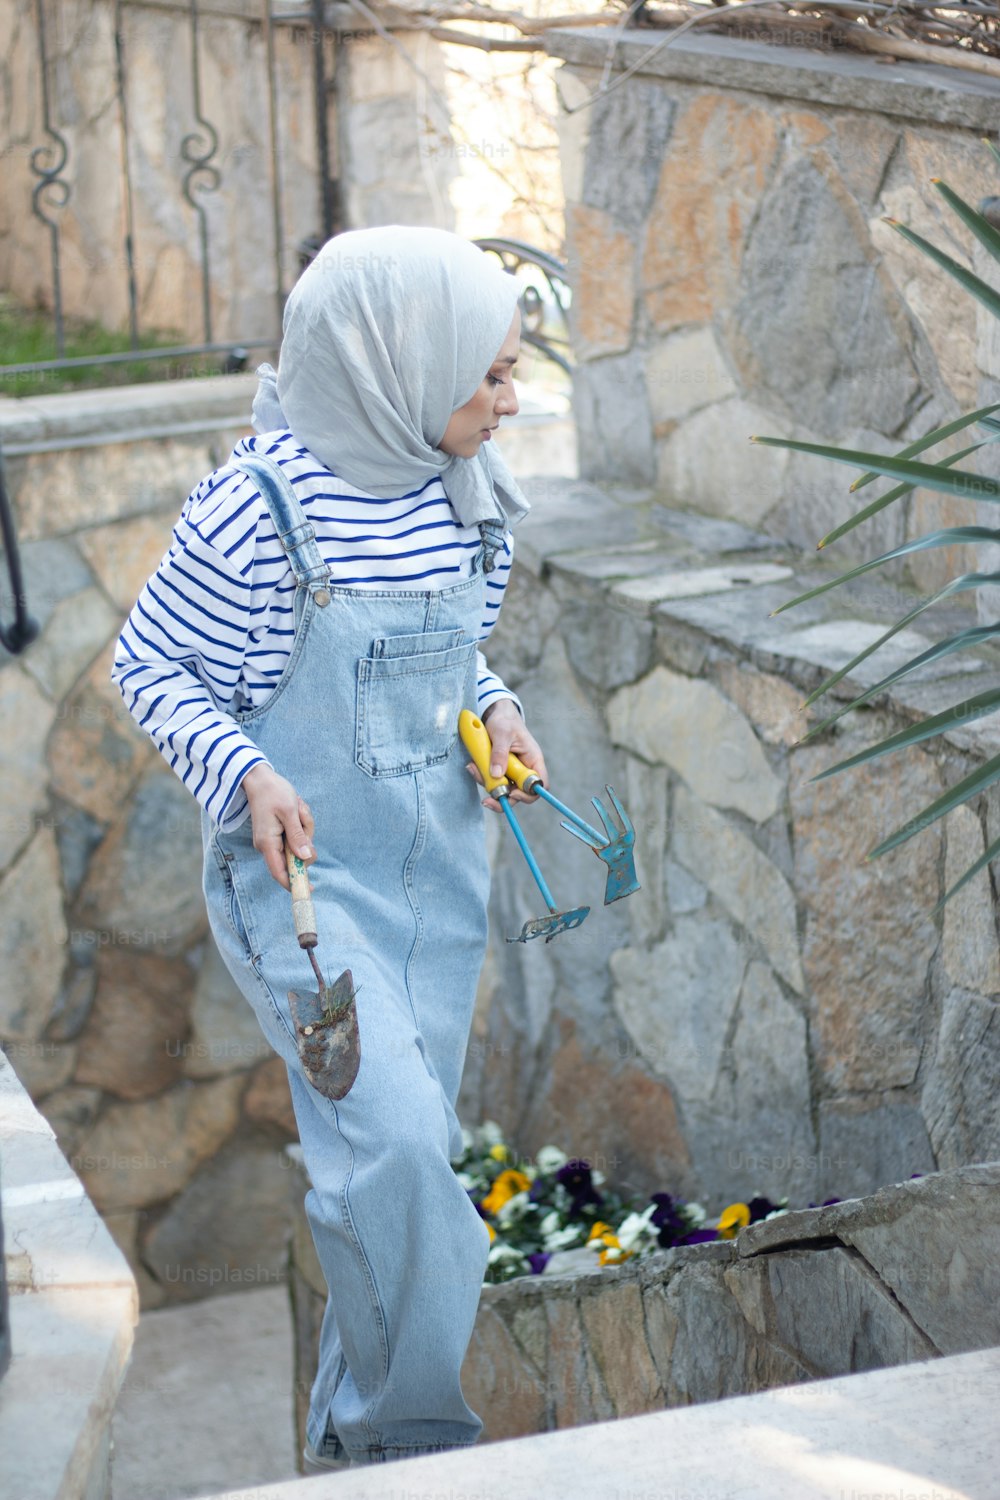 a woman in overalls and a headscarf holding a banana